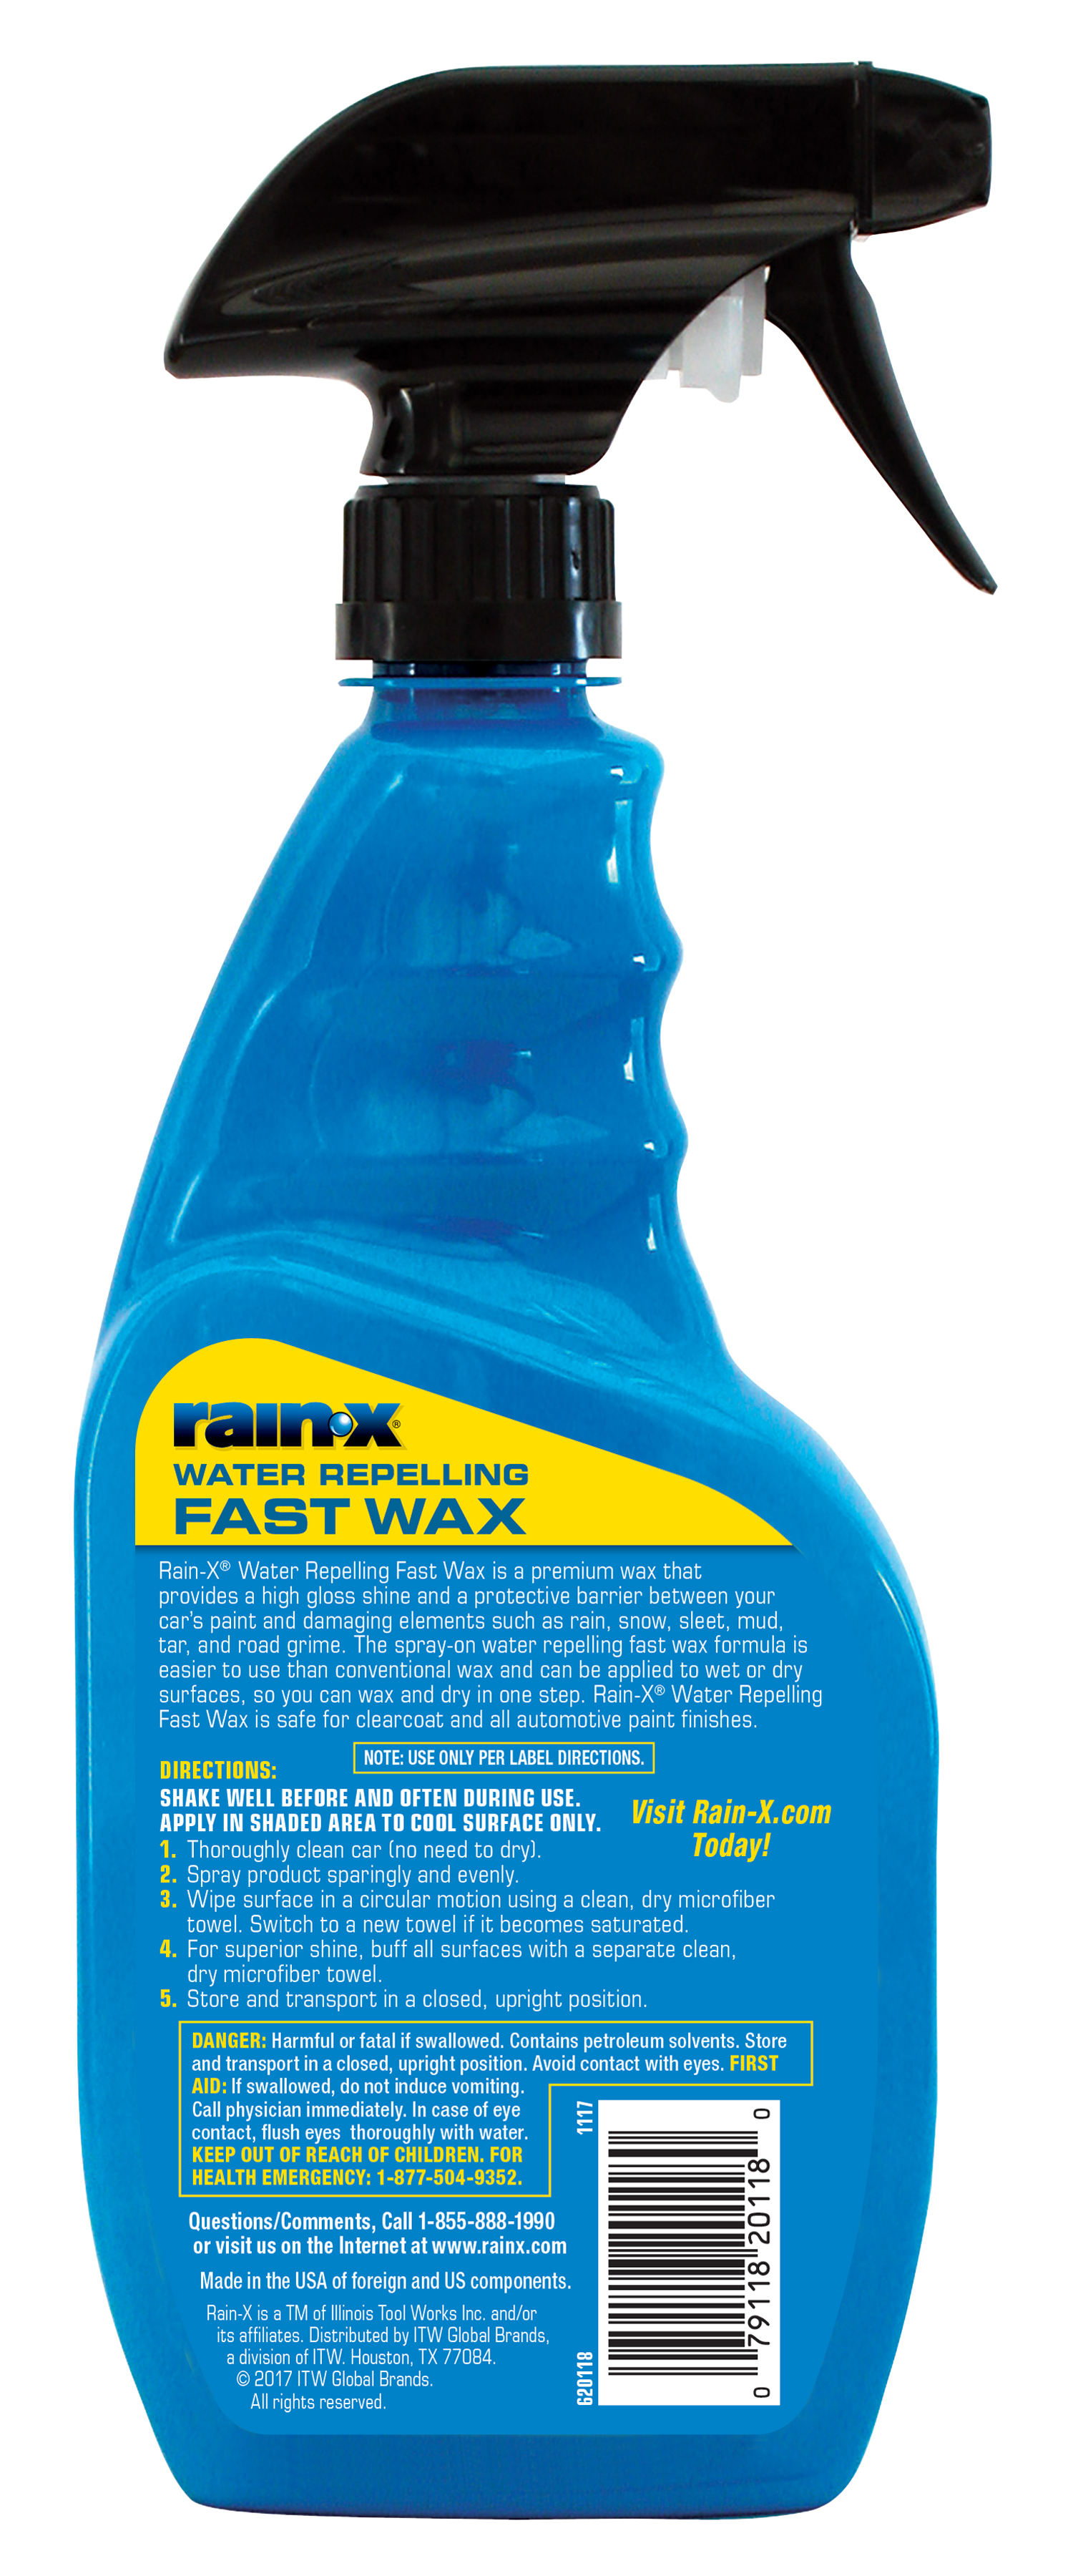 Rain-X 2-IN-1 Spray Fast Wax and Water Repellent - 620118W - image 3 of 3